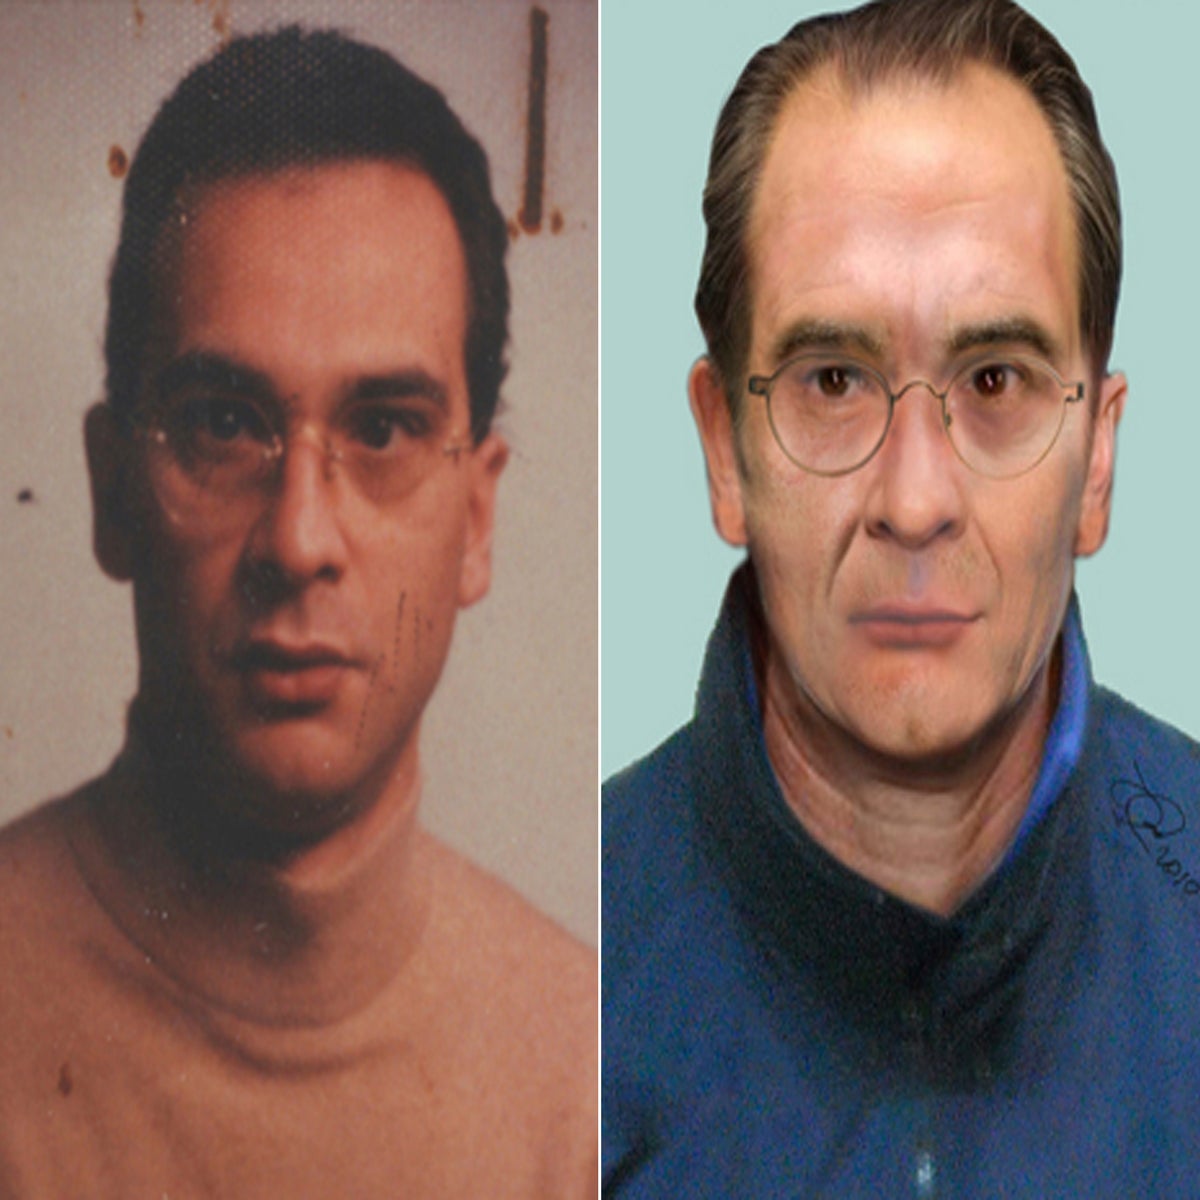 Optagelsesgebyr Soar Misbruge Italy mafia boss arrested after 30 years on the run | The Independent